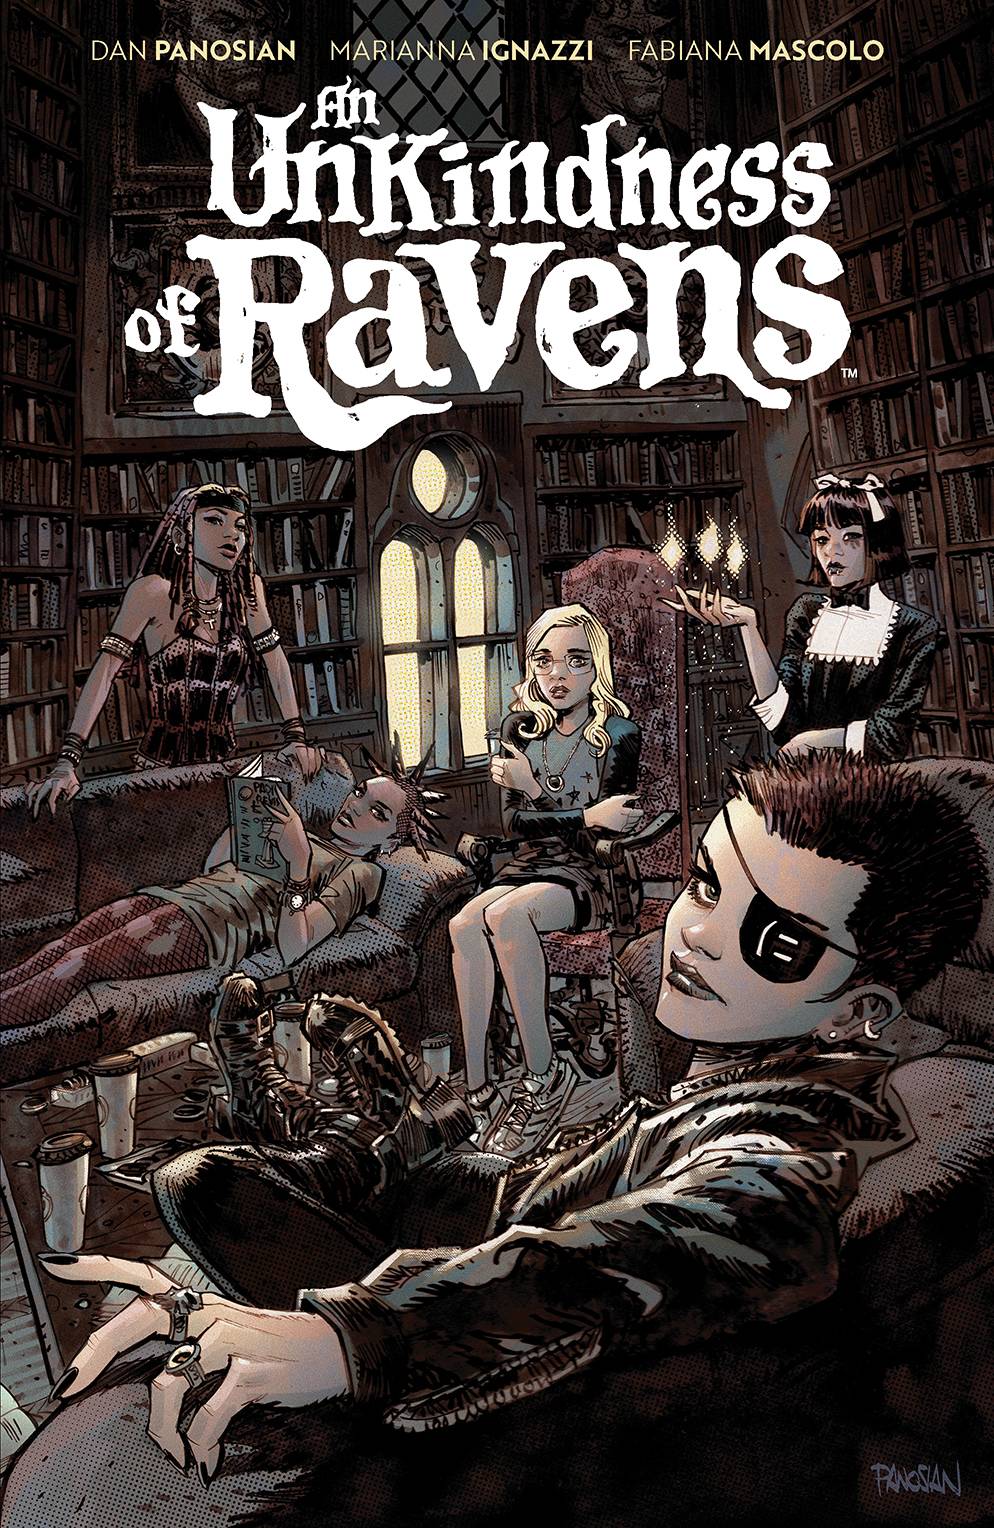 An Unkindness Of Ravens s/c